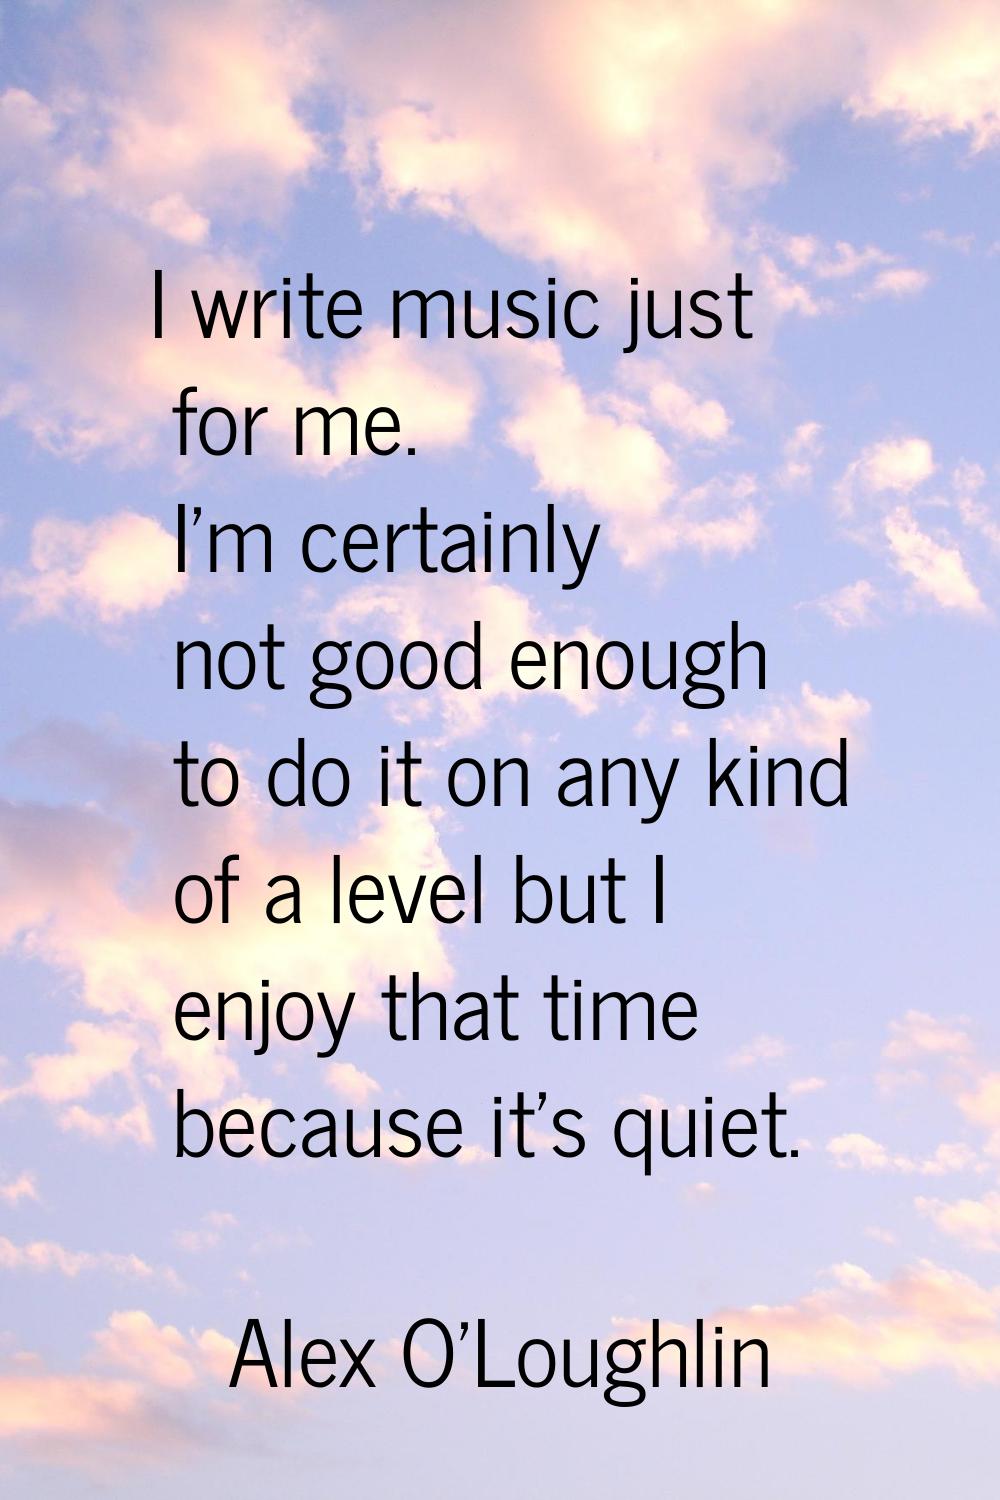 I write music just for me. I'm certainly not good enough to do it on any kind of a level but I enjo